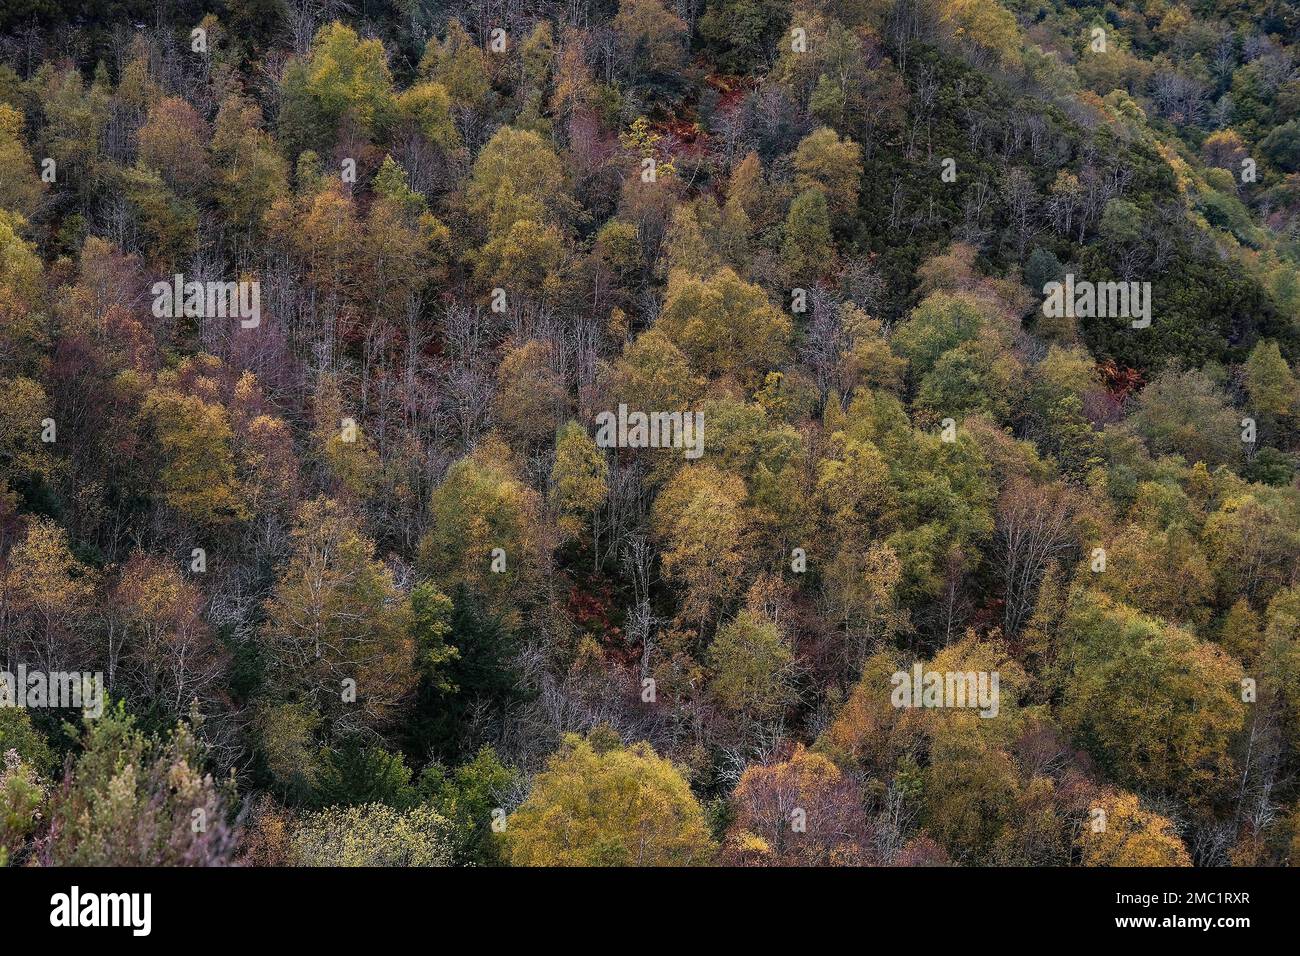 European white birch (Betula pubescens) stand of trees with autumnal golden foliage Stock Photo